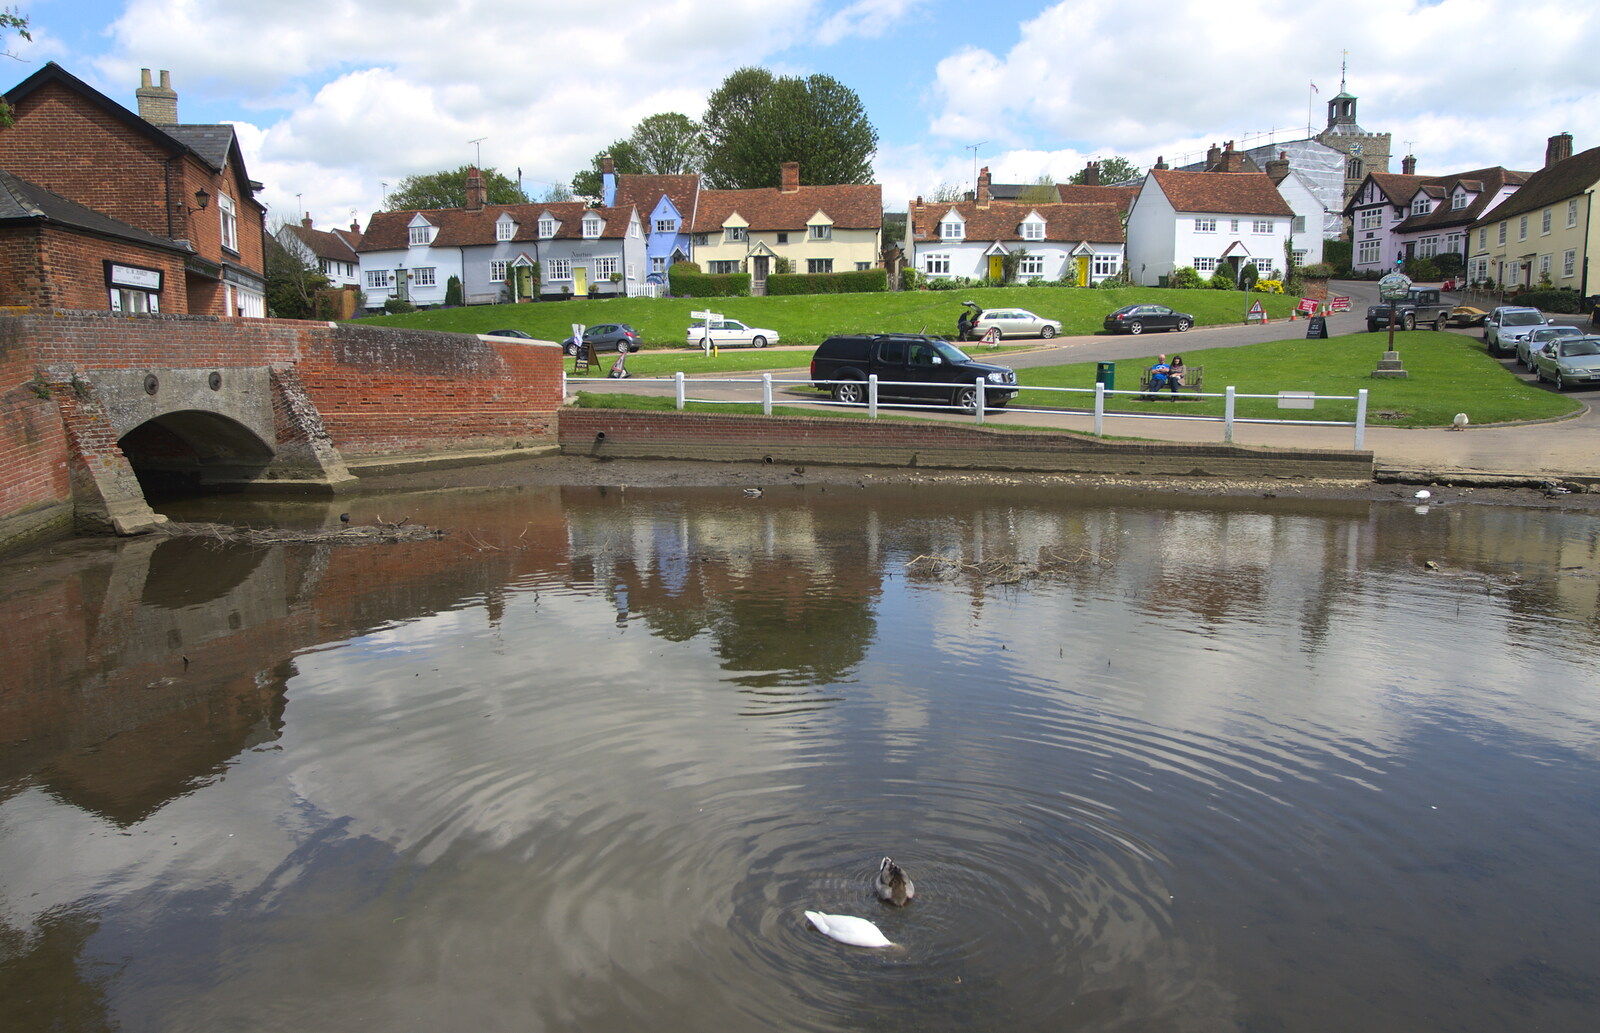 The Finchingfield duck pond from The BSCC Cycling Weekend, The Swan Inn, Thaxted, Essex - 12th May 2012